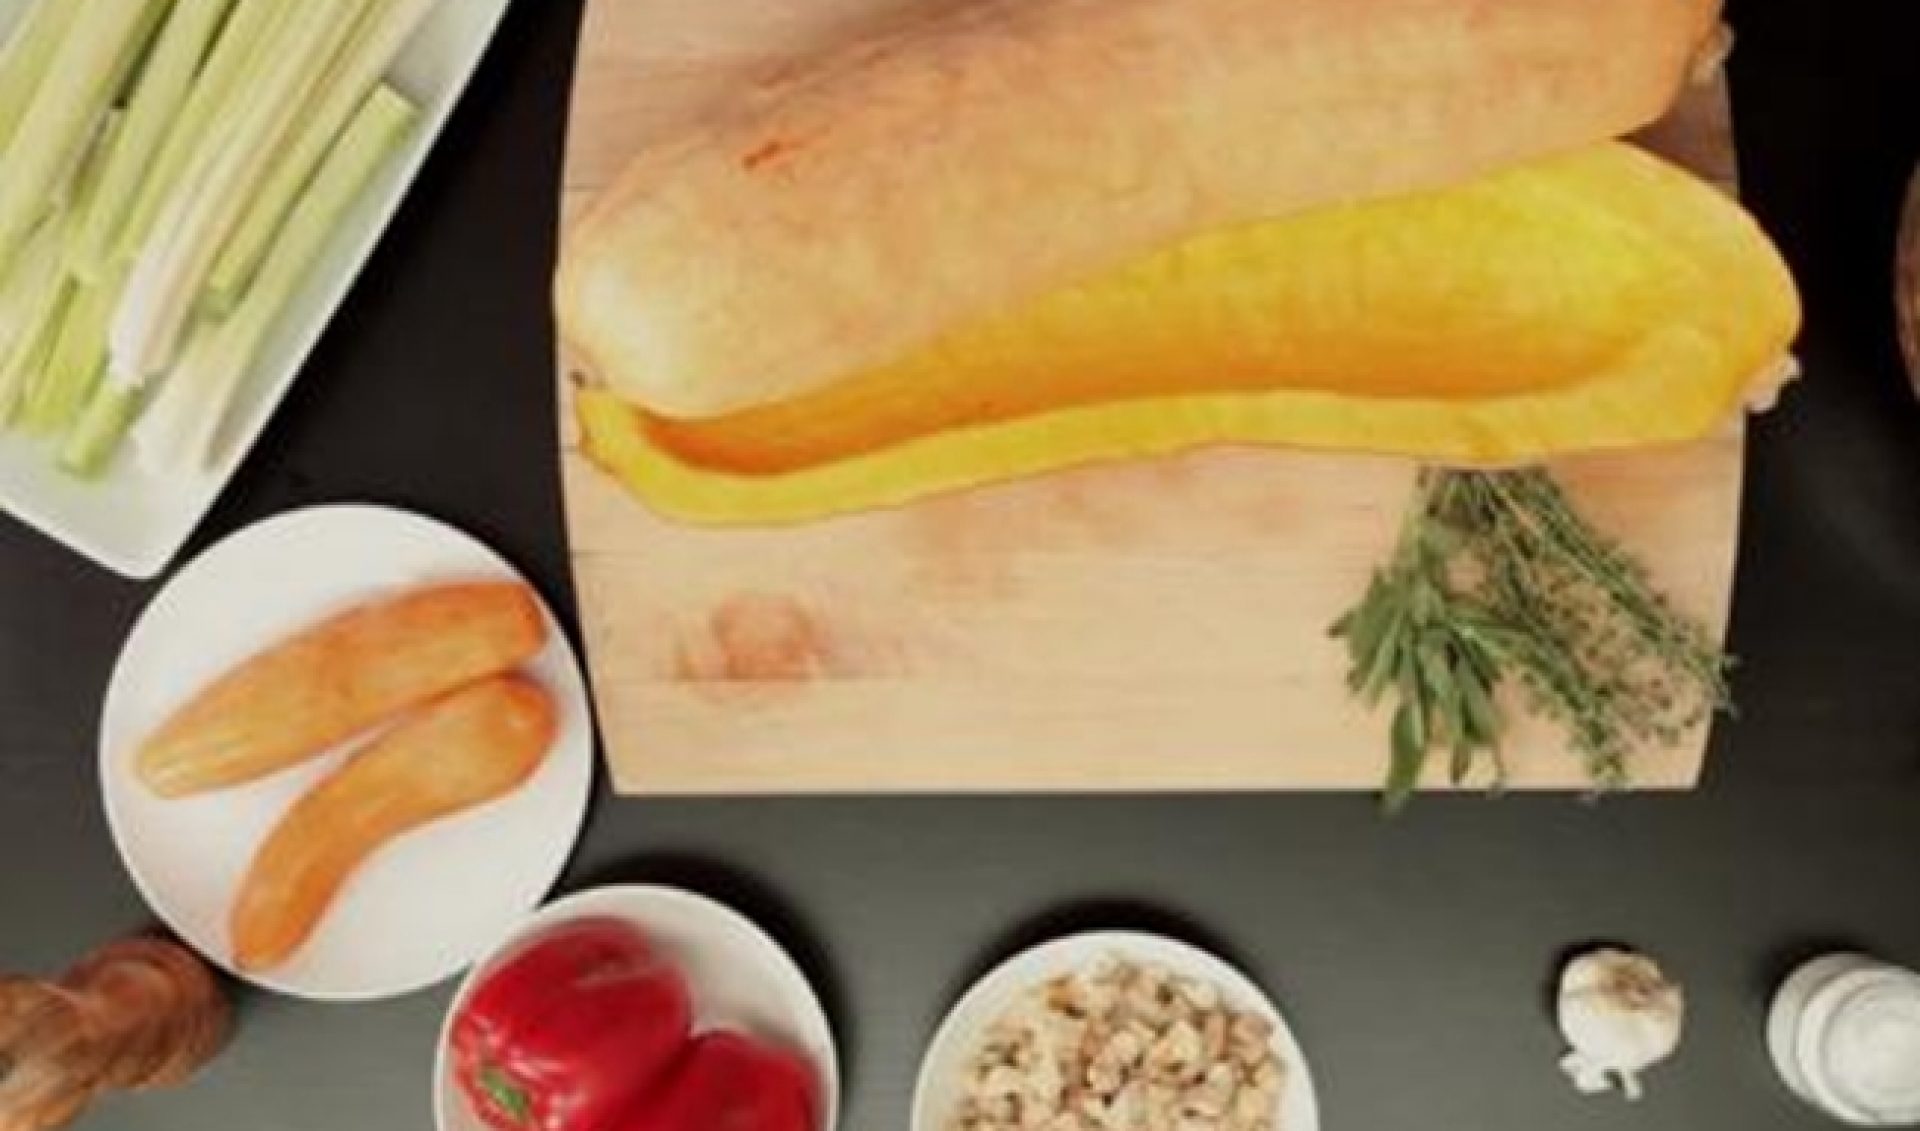 Cooking Channel’s ‘Good To Know’ Series Introduces The Veggieducken